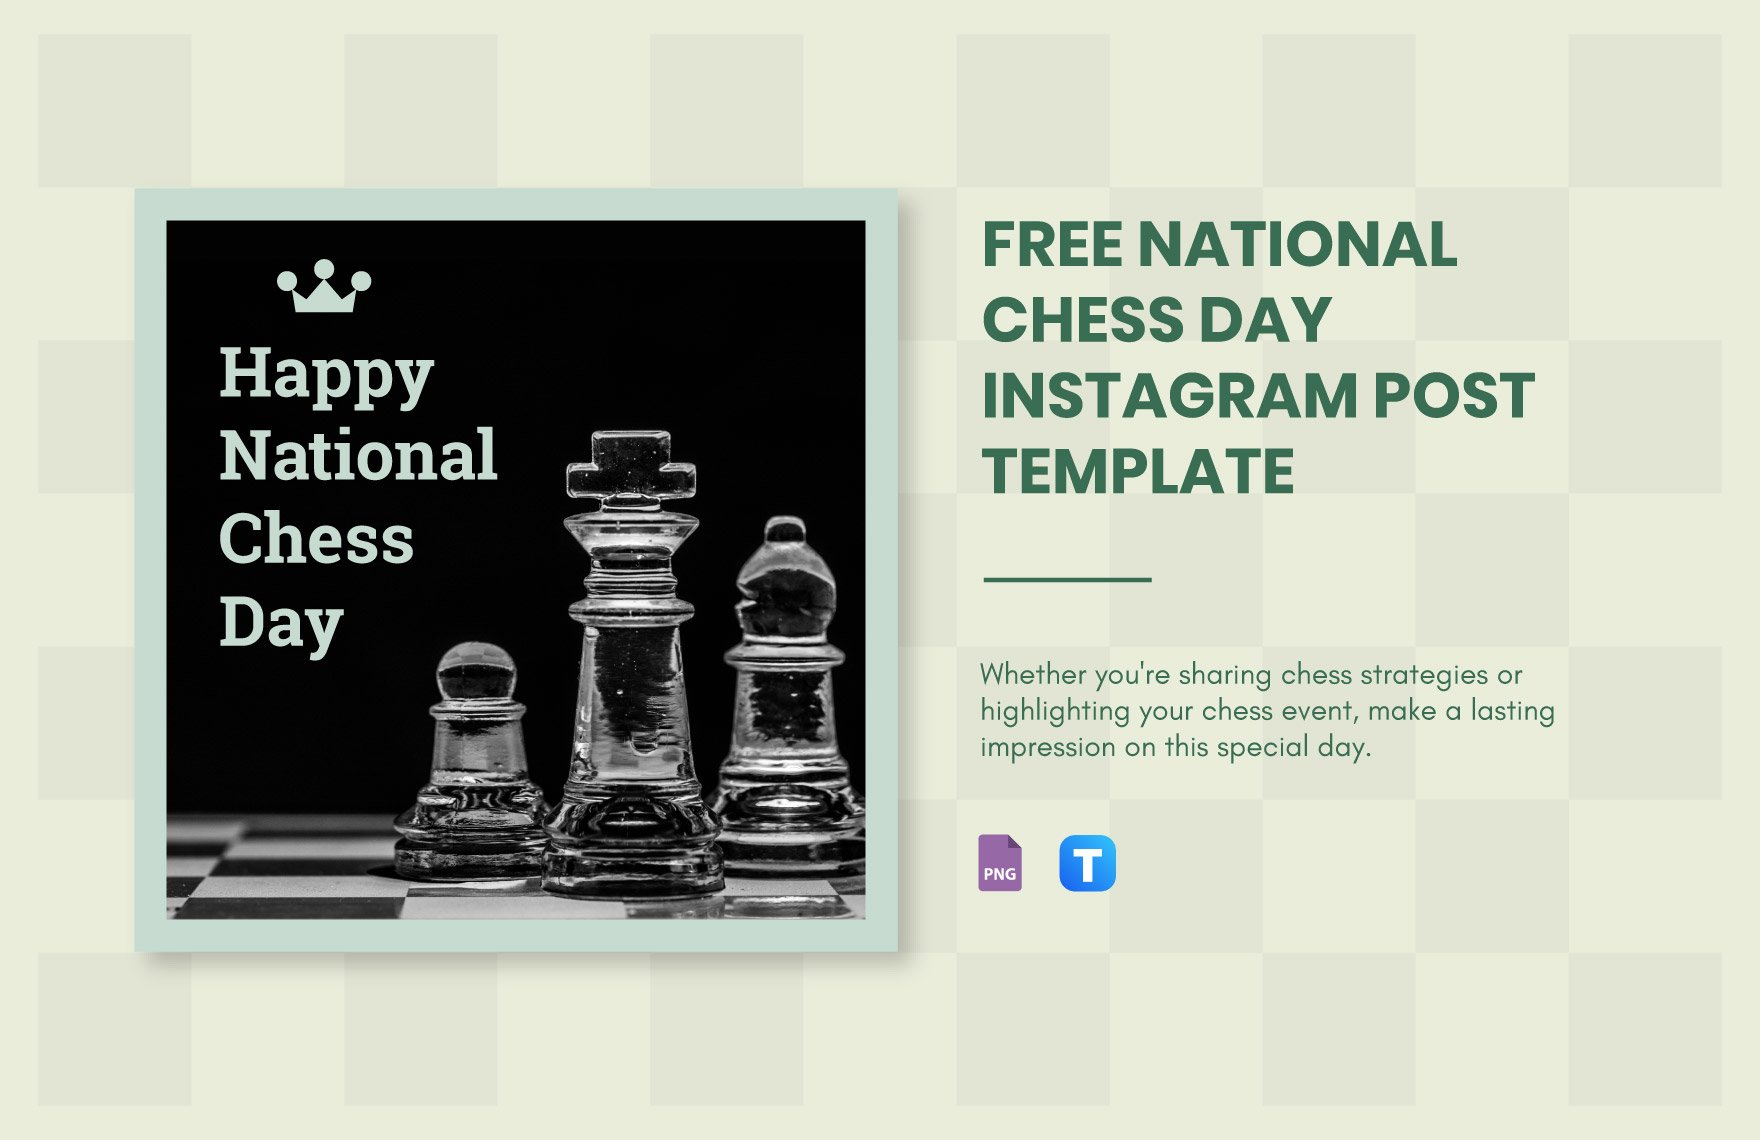 Free National Chess Day Instagram Post Template in PNG